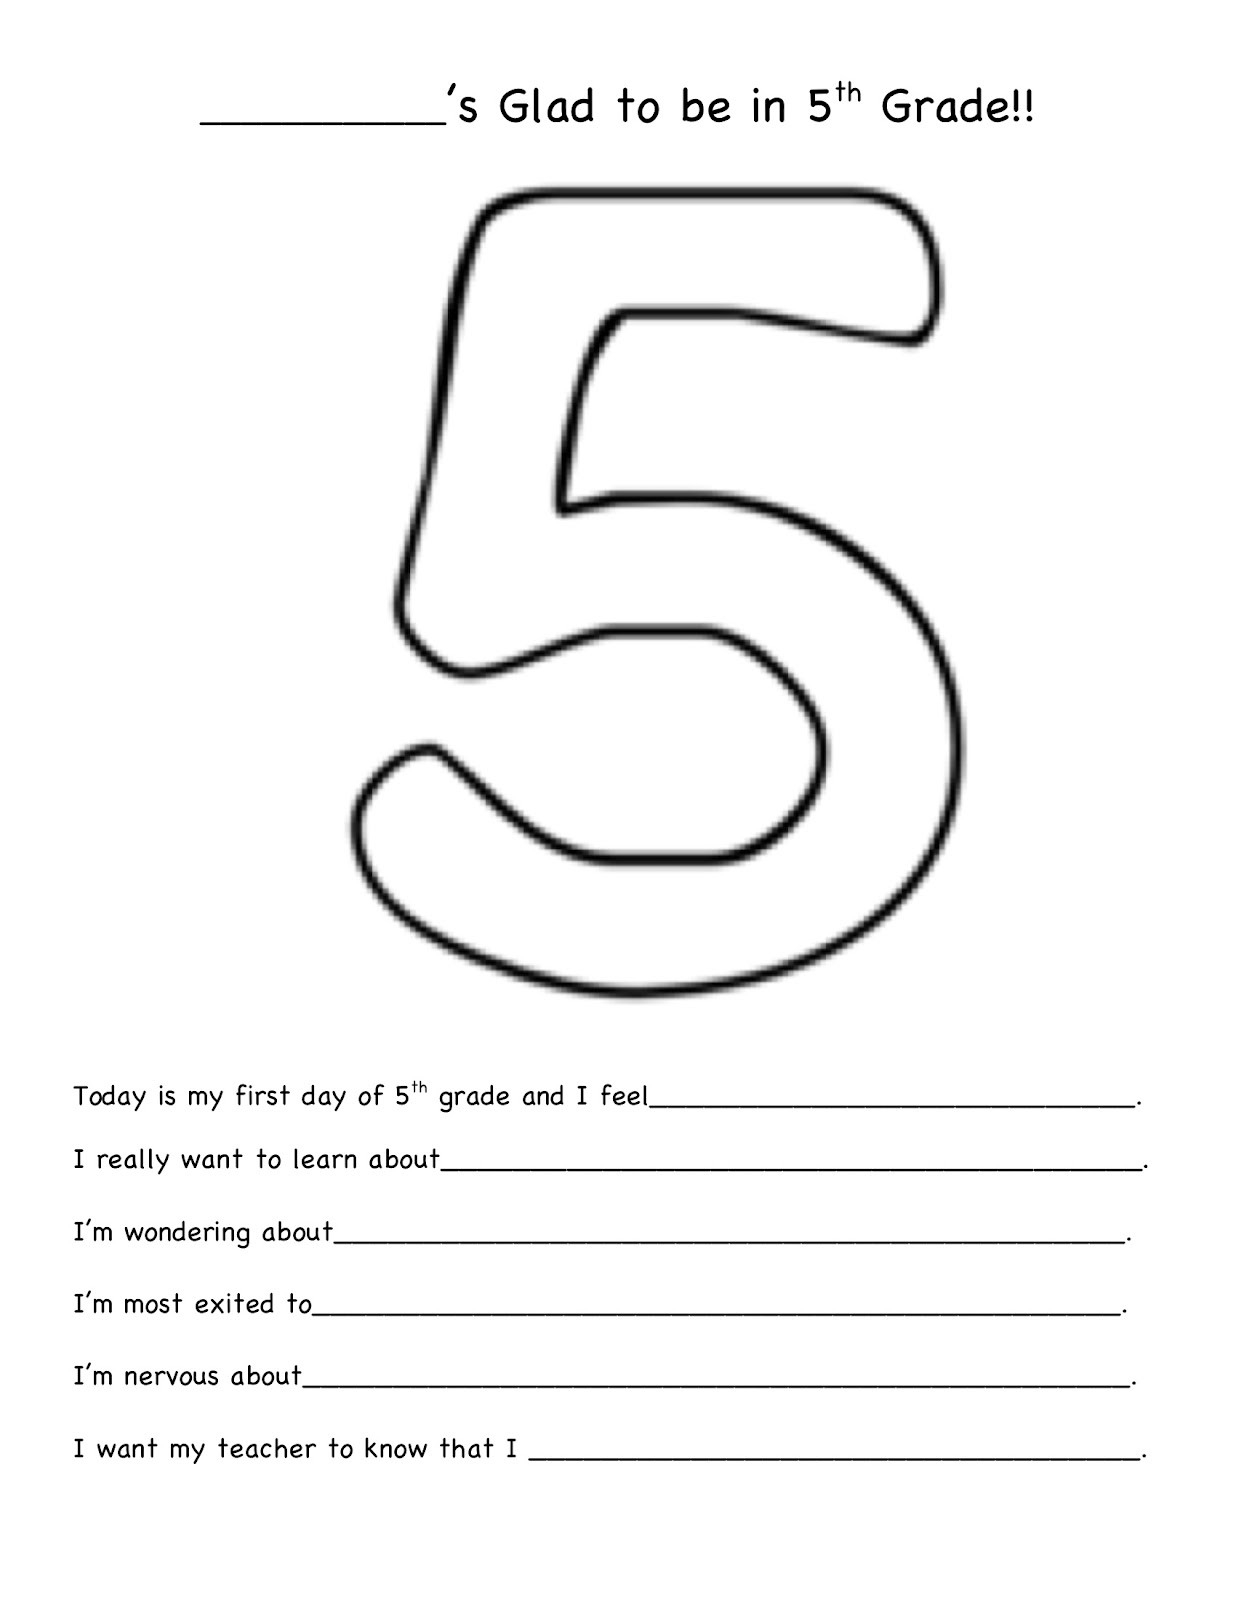 fun-printable-activities-for-5th-graders